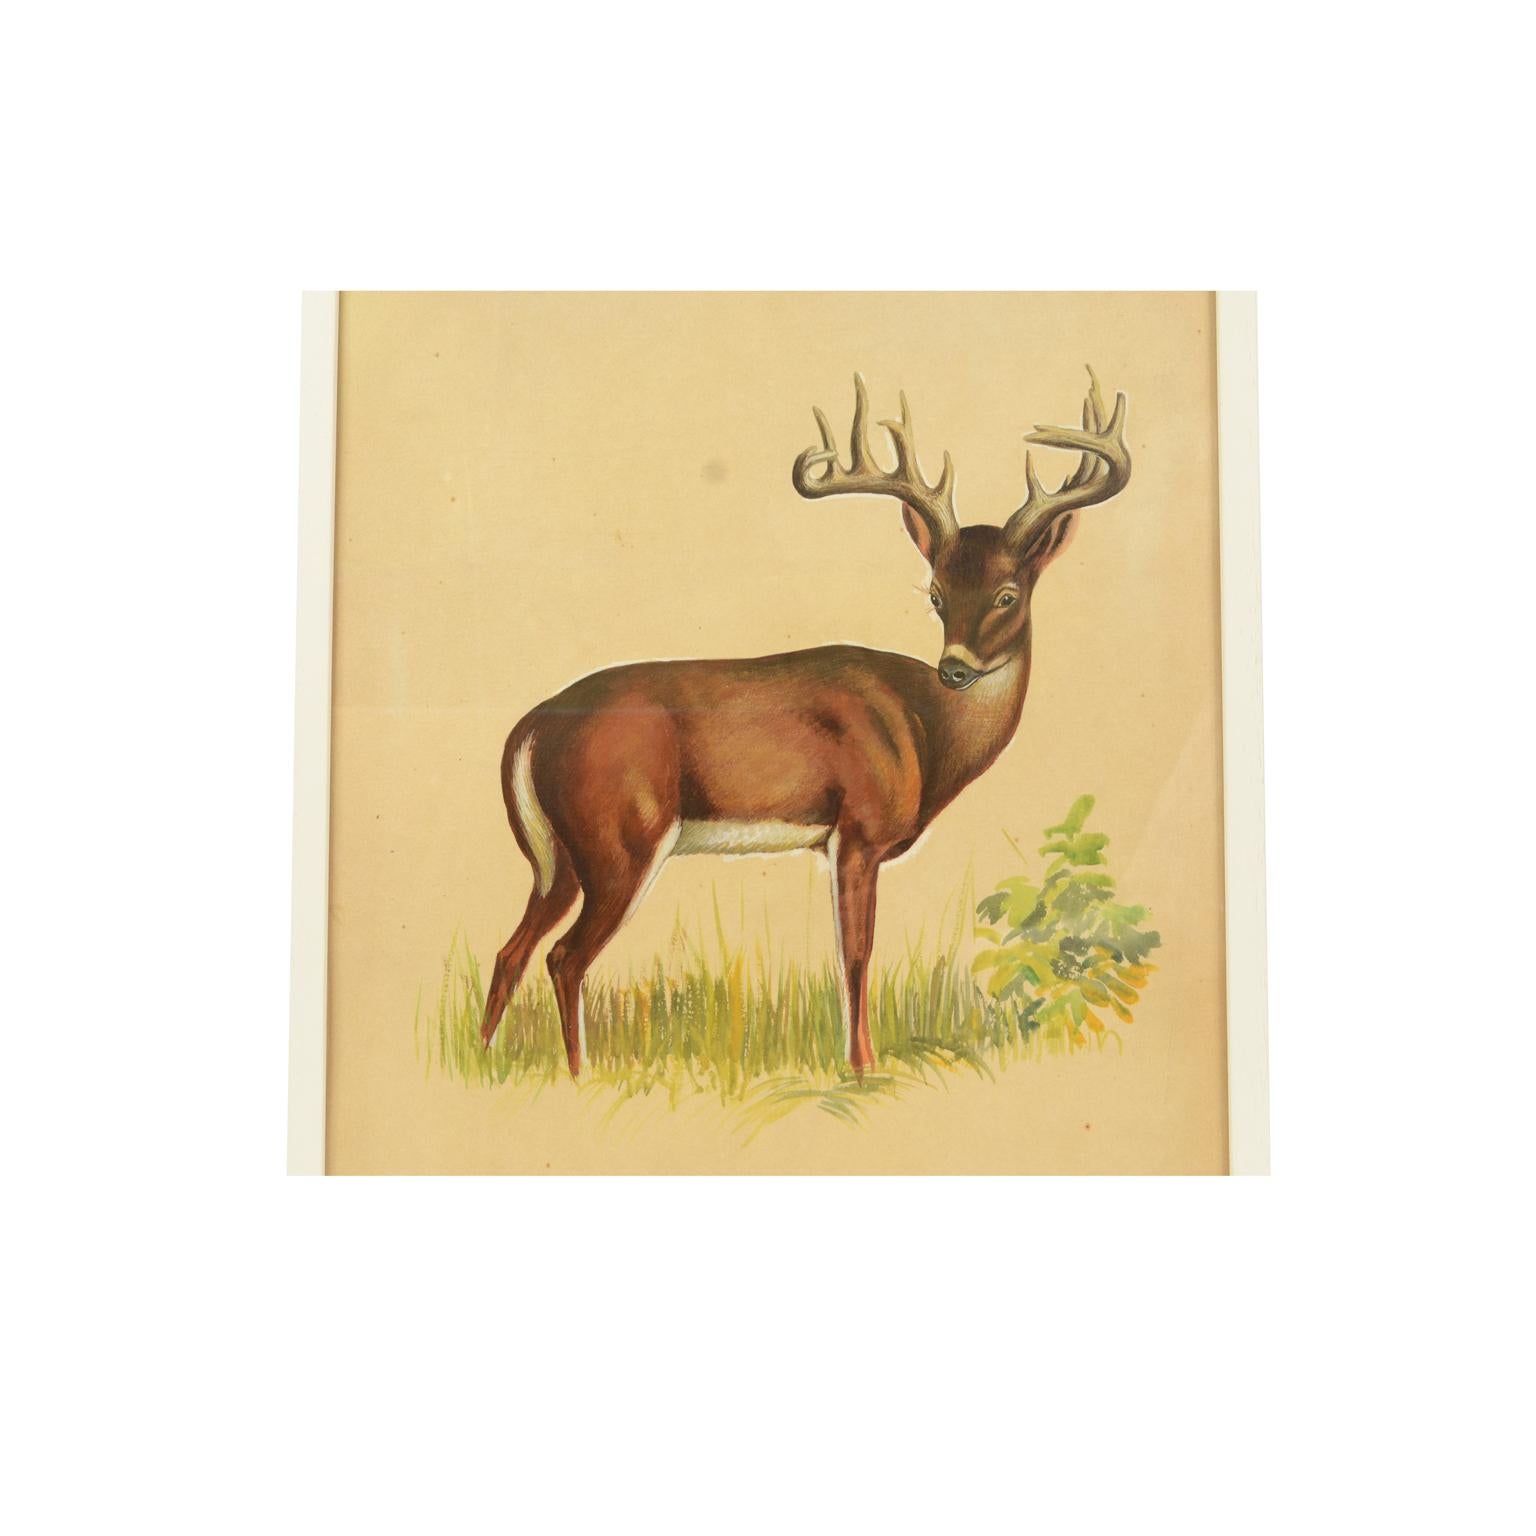 Acrylic colors on paper depicting a hind; it is a preparatory sketch commissioned for an animals encyclopedia for children, created and signed by a Korean artist in the 1970s. Very good condition. With frame 49.5 x 67 cm.
Shipping is insured by